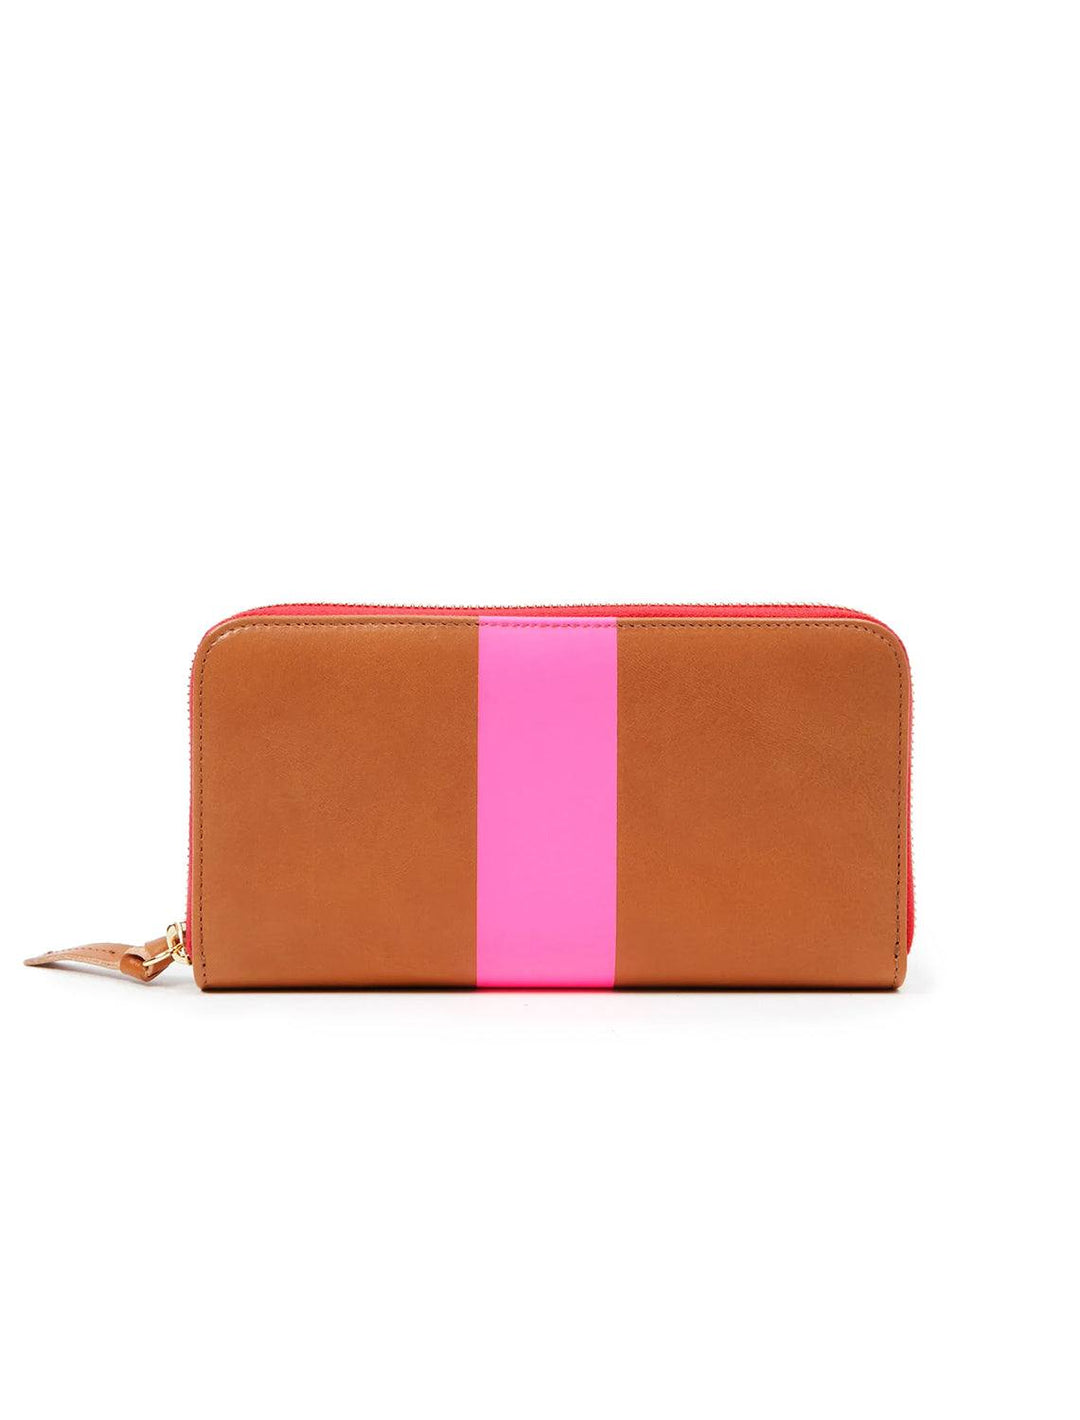 zip wallet in natural with neon pink stripe – Twigs